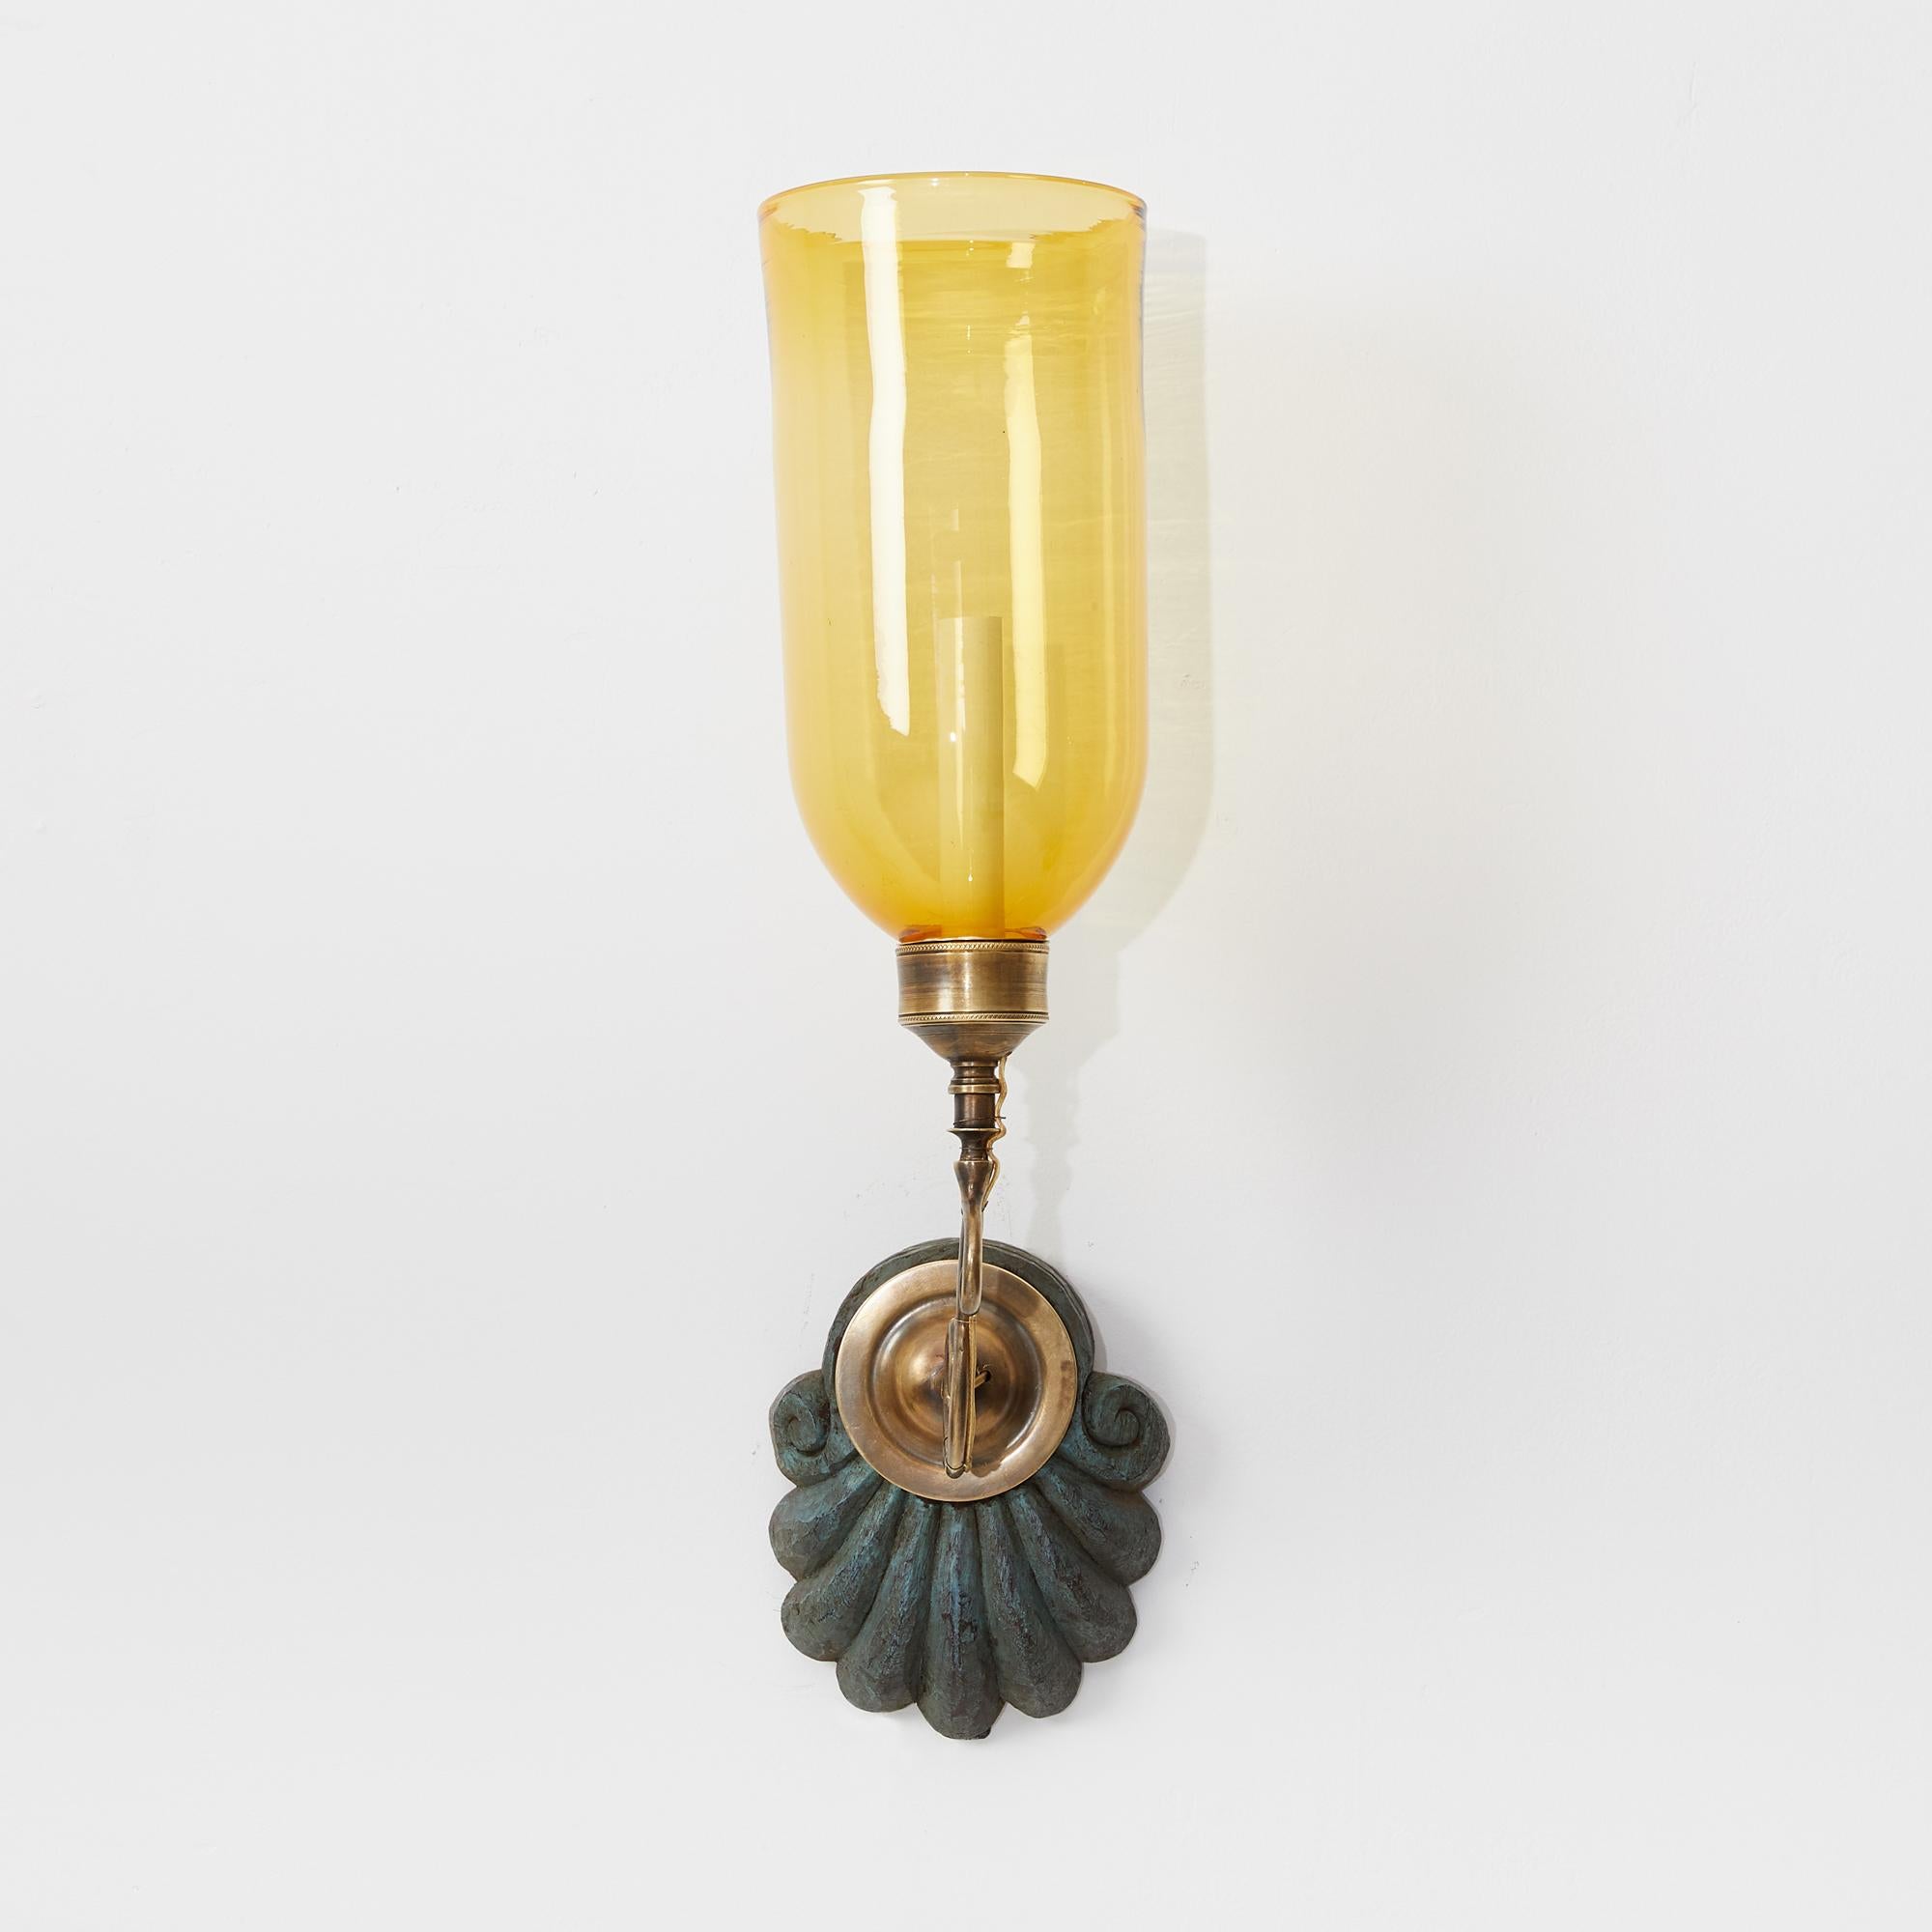 Georgian Pair of David Duncan Scallop Shell Sconces with Yellow Hurricane Shades